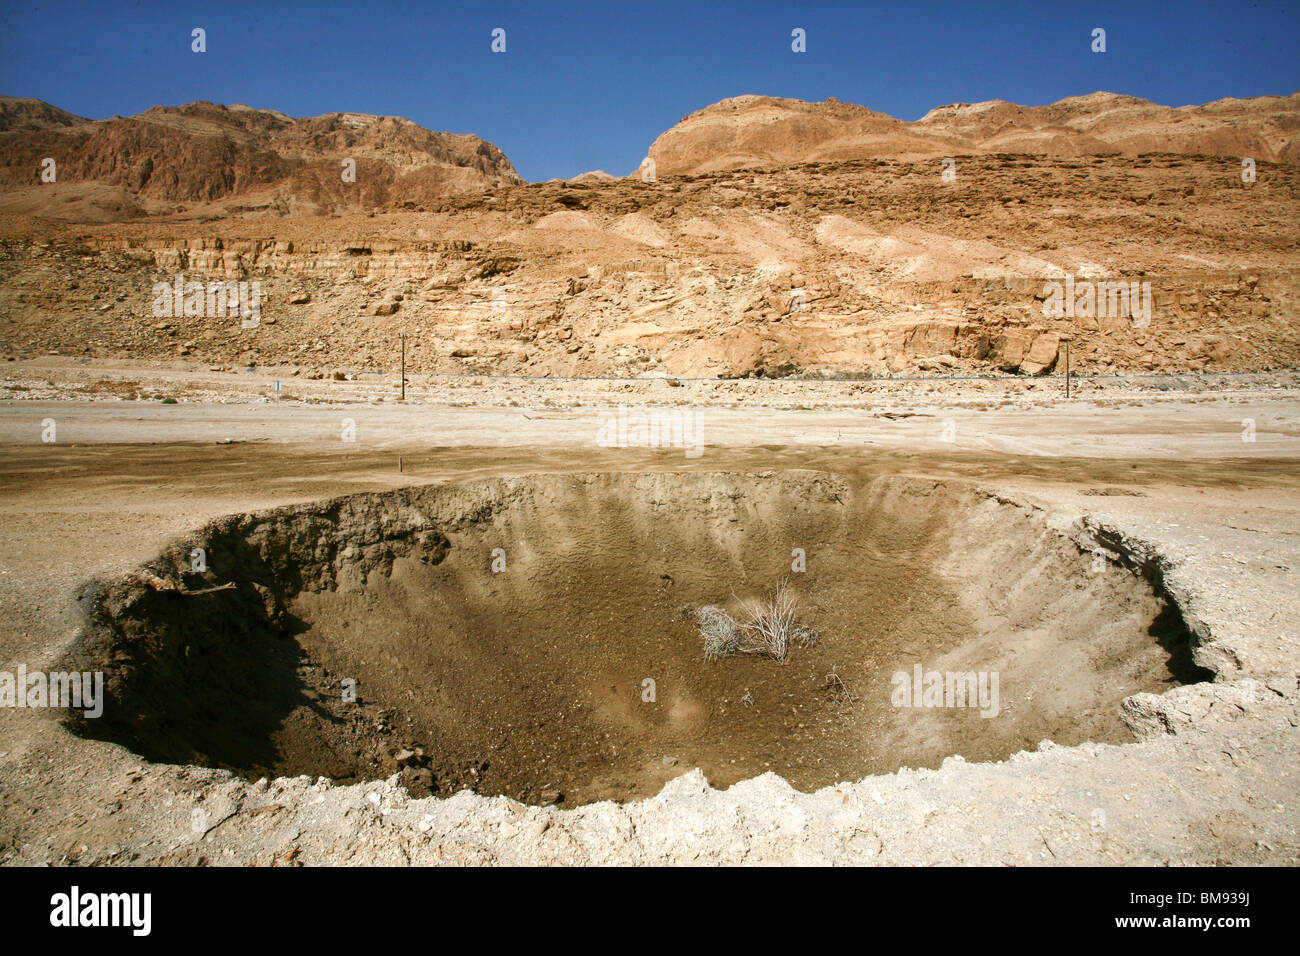 Israel, Dead Sea A sinkhole caused by the receding water level of the Dead Sea Stock Photo